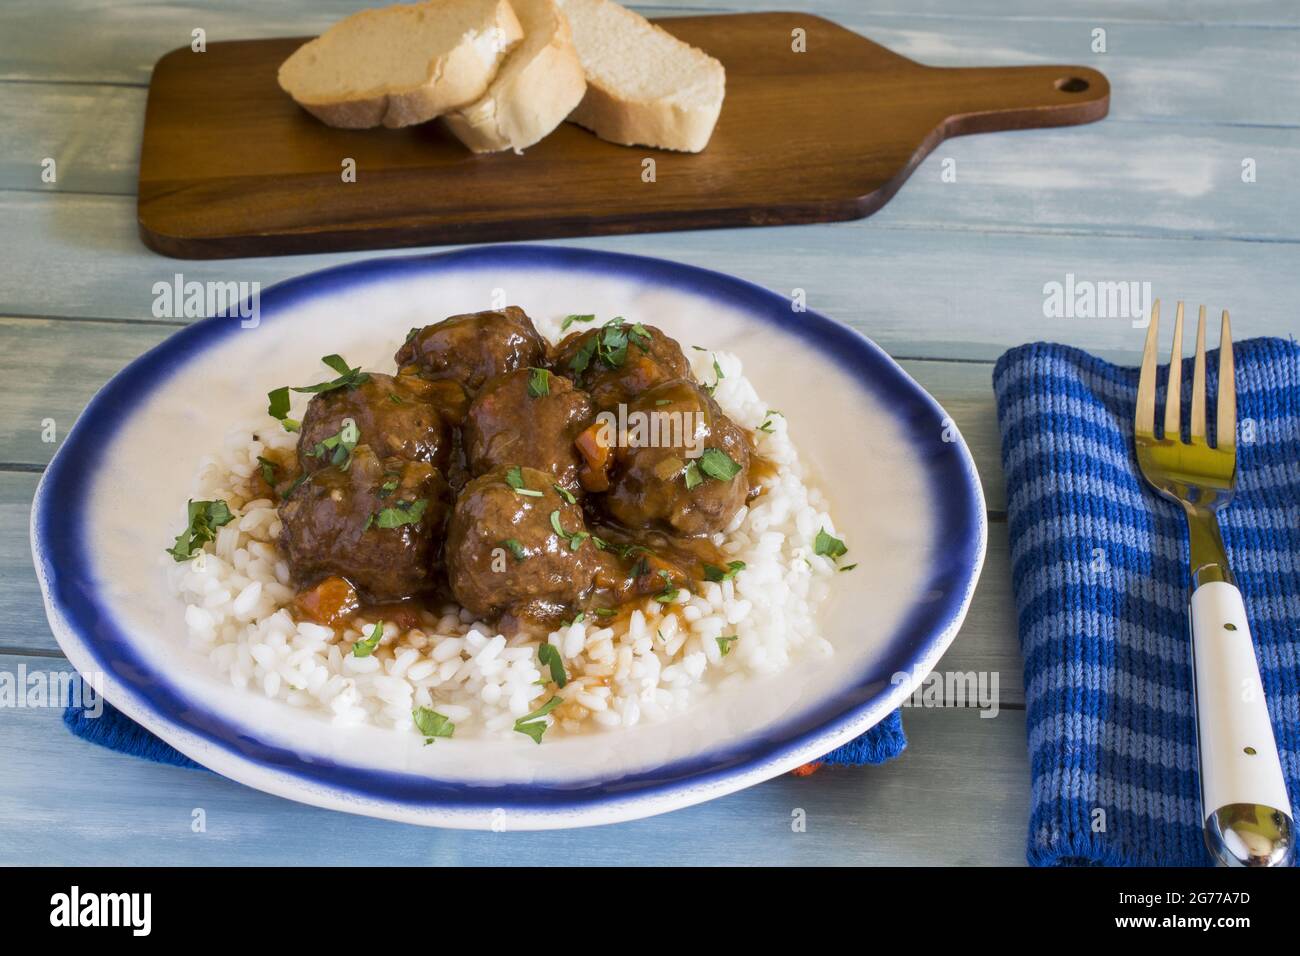 Closeup image of rice with saucy meat and greens on top in the plate and a fork on it with bread Stock Photo